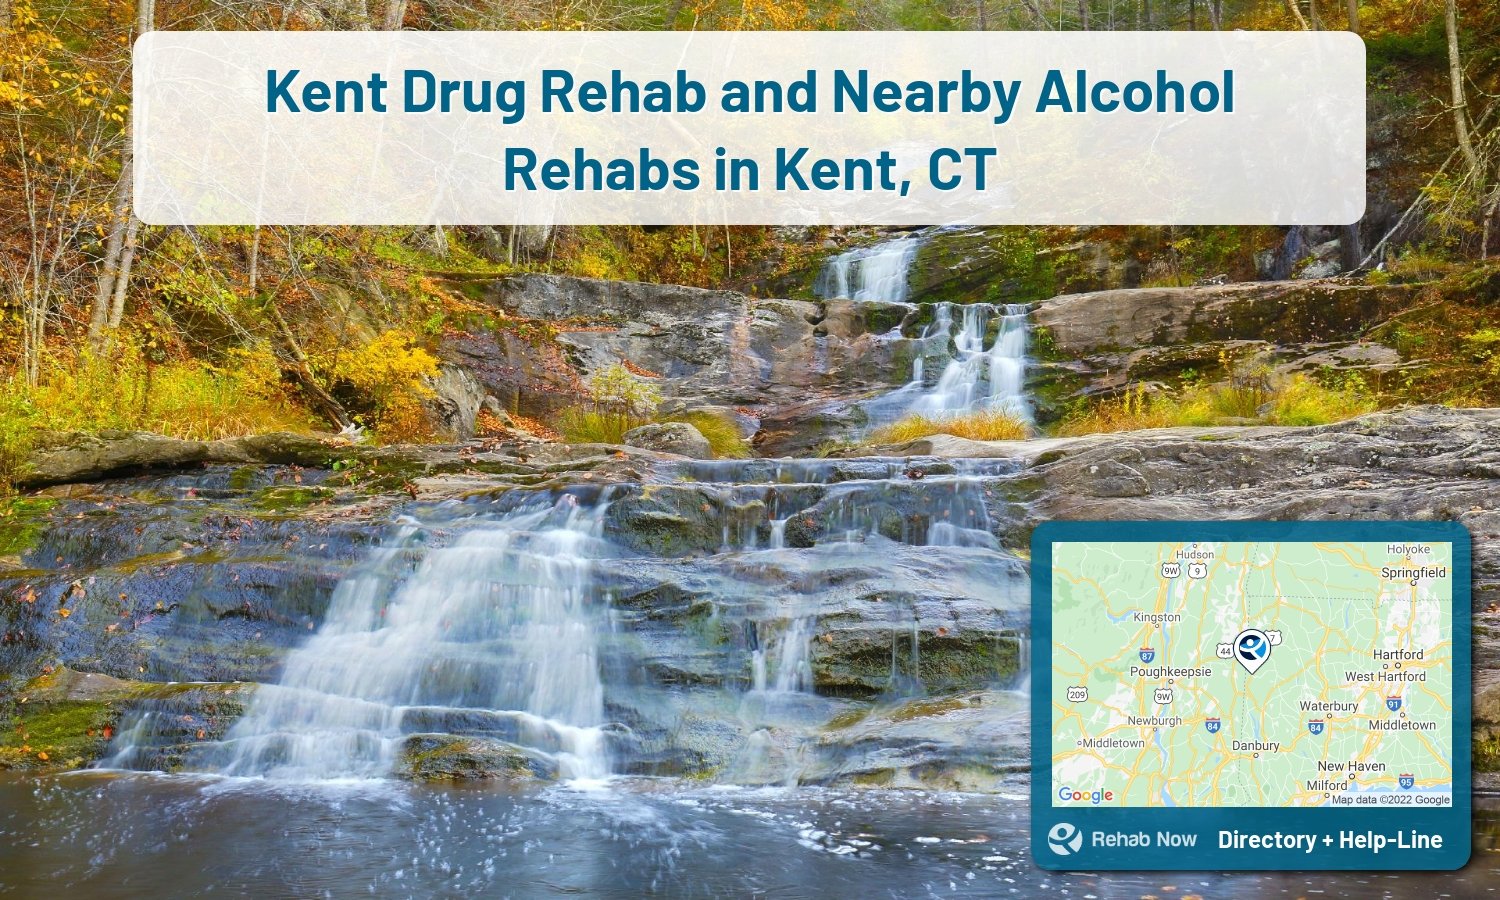 Drug rehab and alcohol treatment services nearby Kent, CT. Need help choosing a treatment program? Call our free hotline!